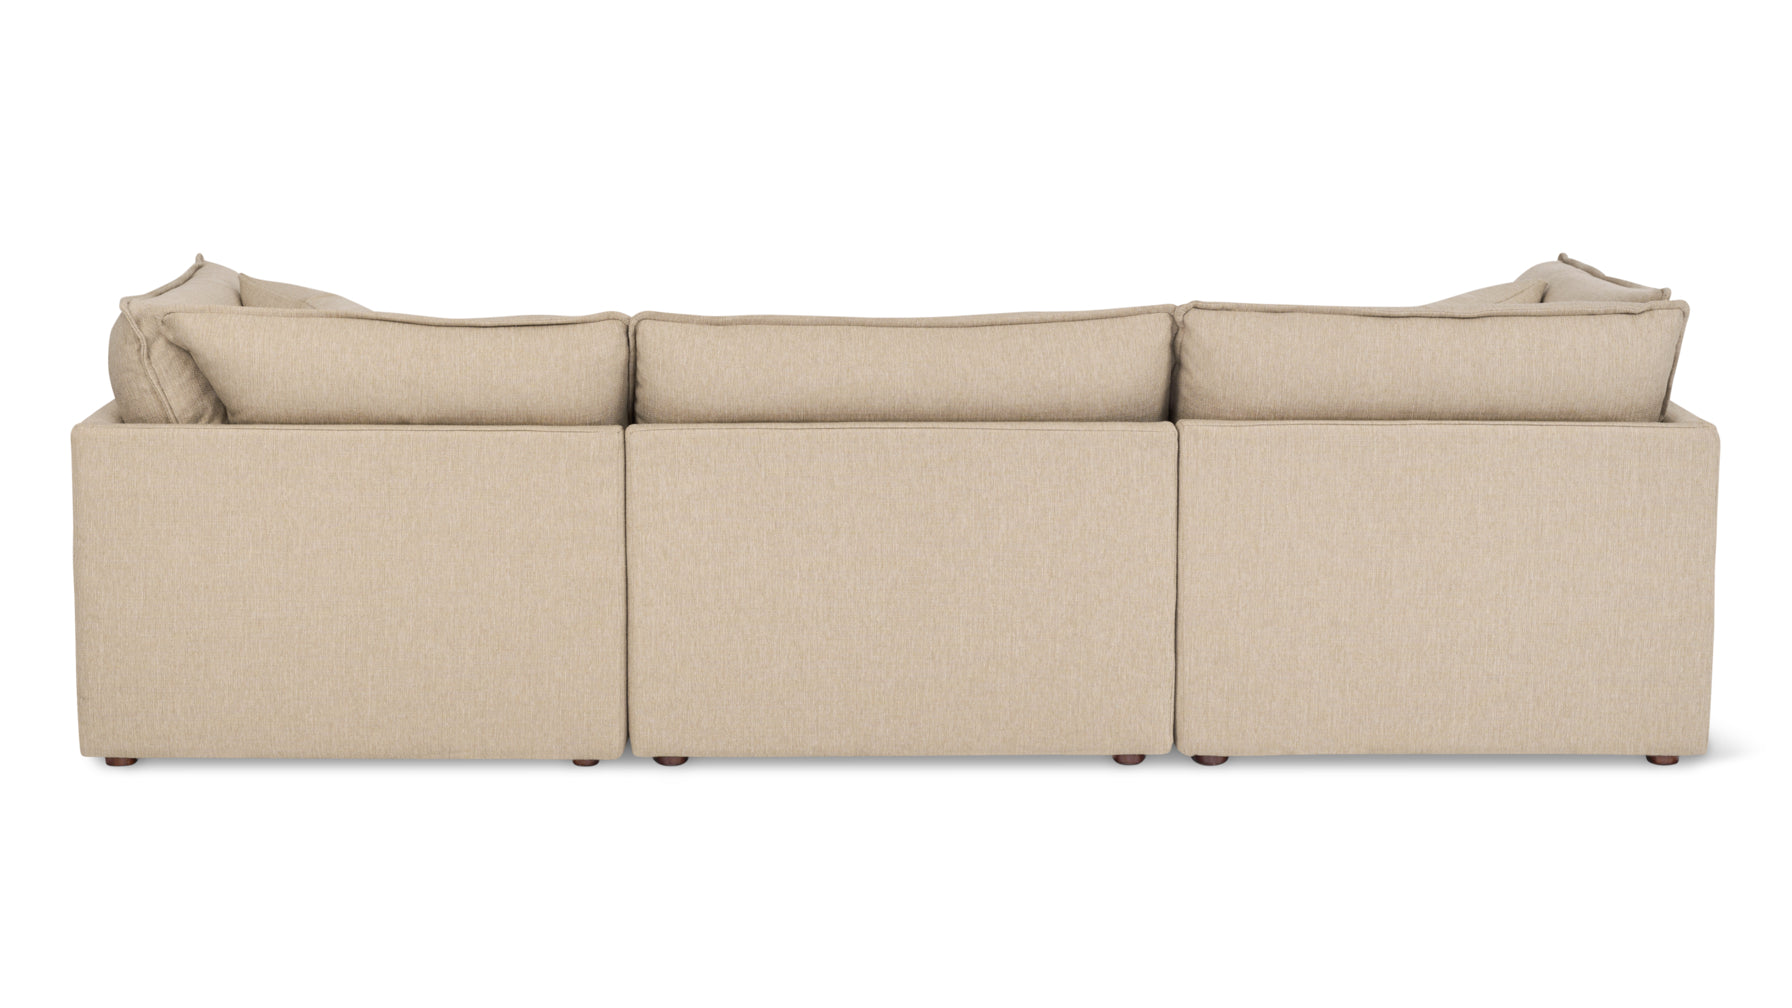 Chill Time 3-Piece Modular Sofa, Biscuit - Image 4